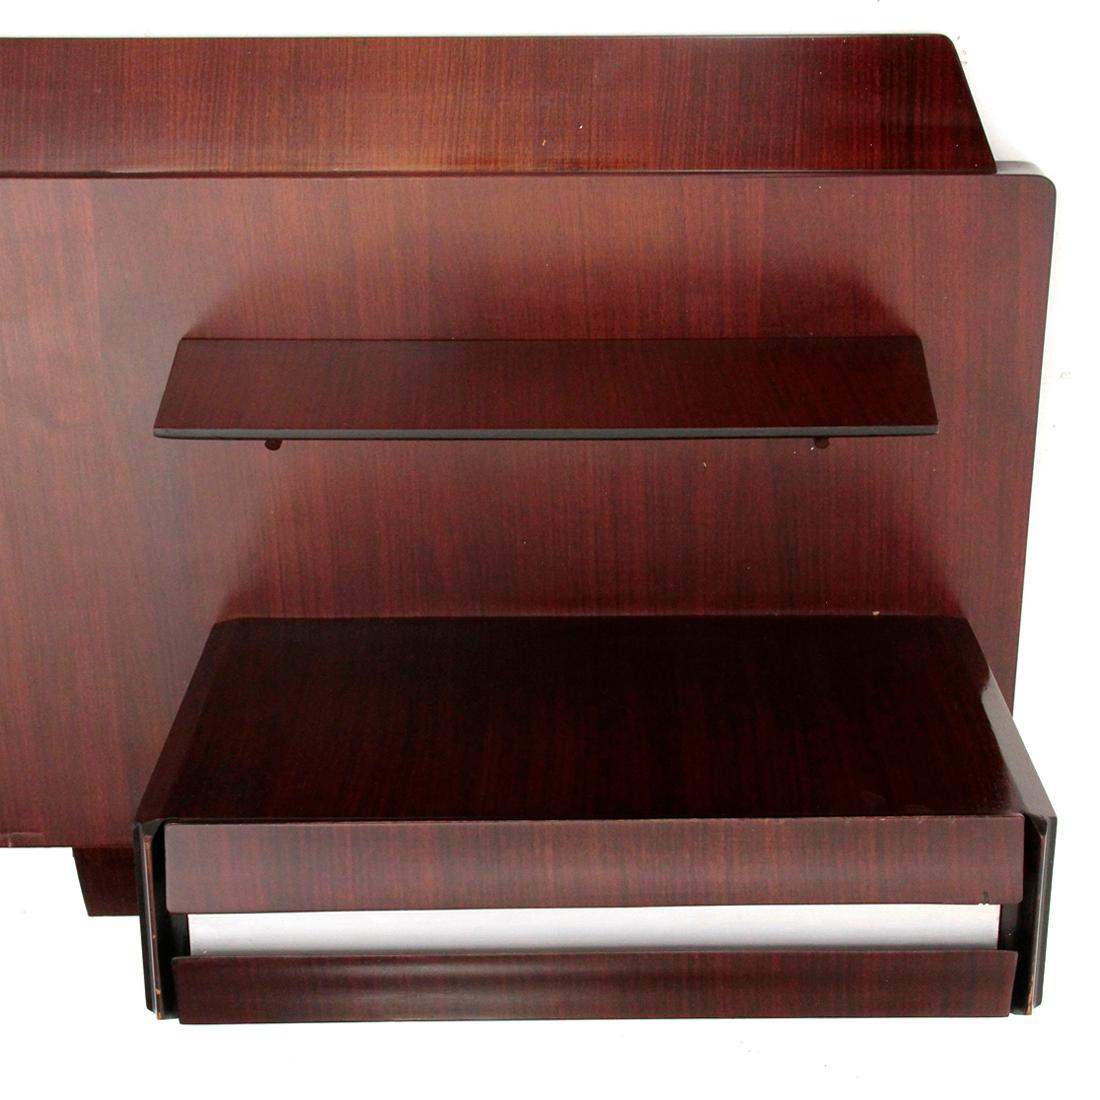 Mid-20th Century Midcentury Brown and White Italian Headboard with Nightstands, 1960s